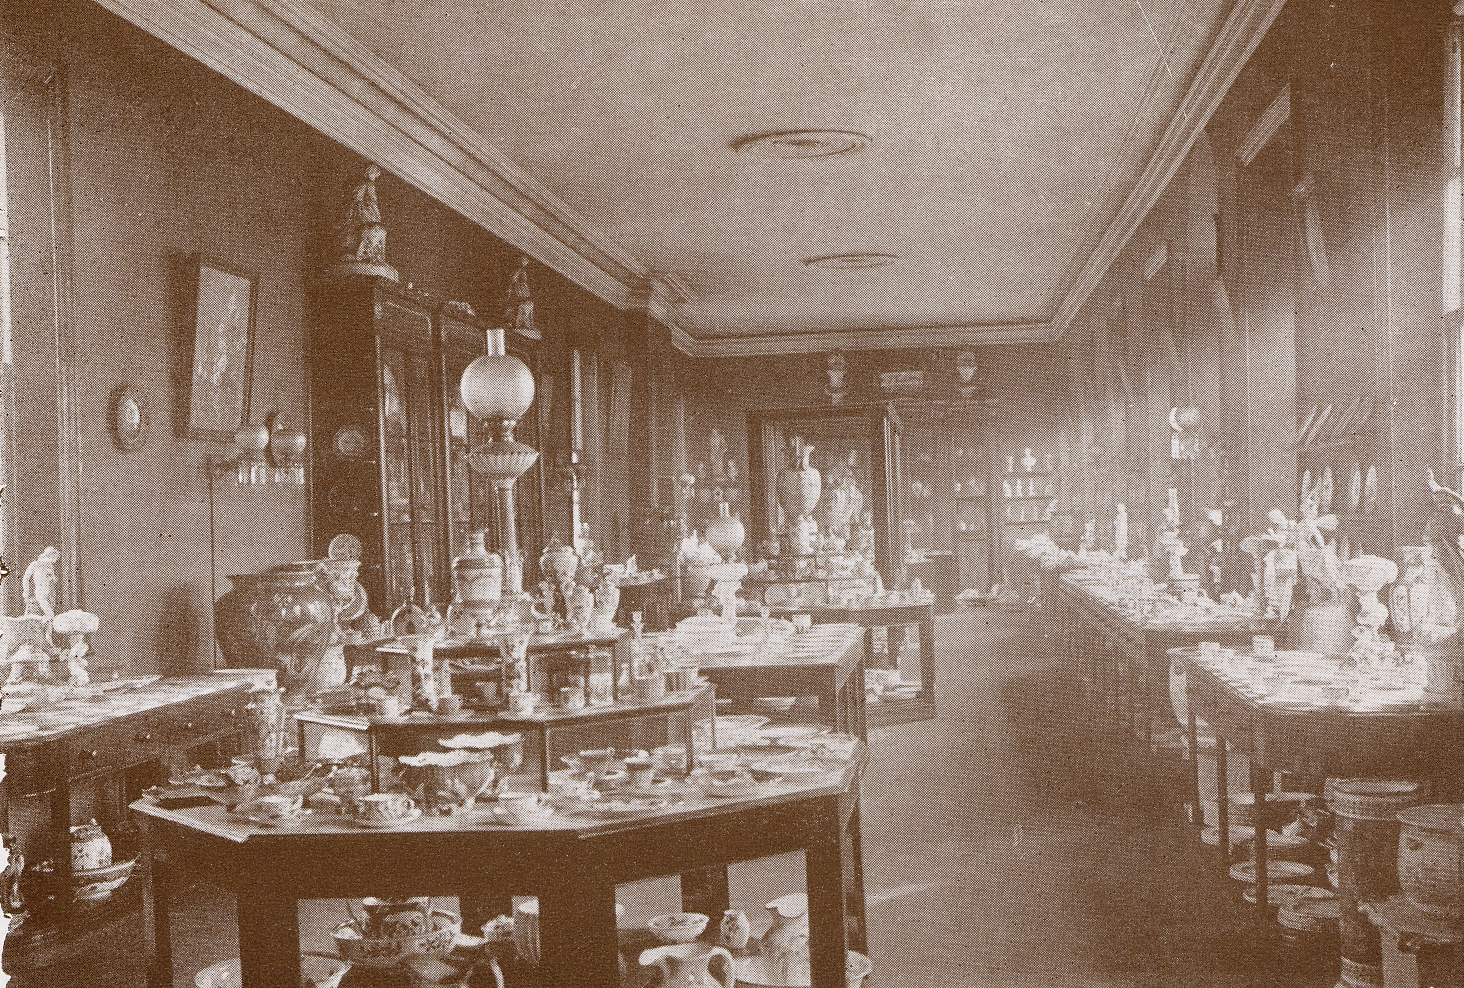 Spode Museum collection on display in 1902